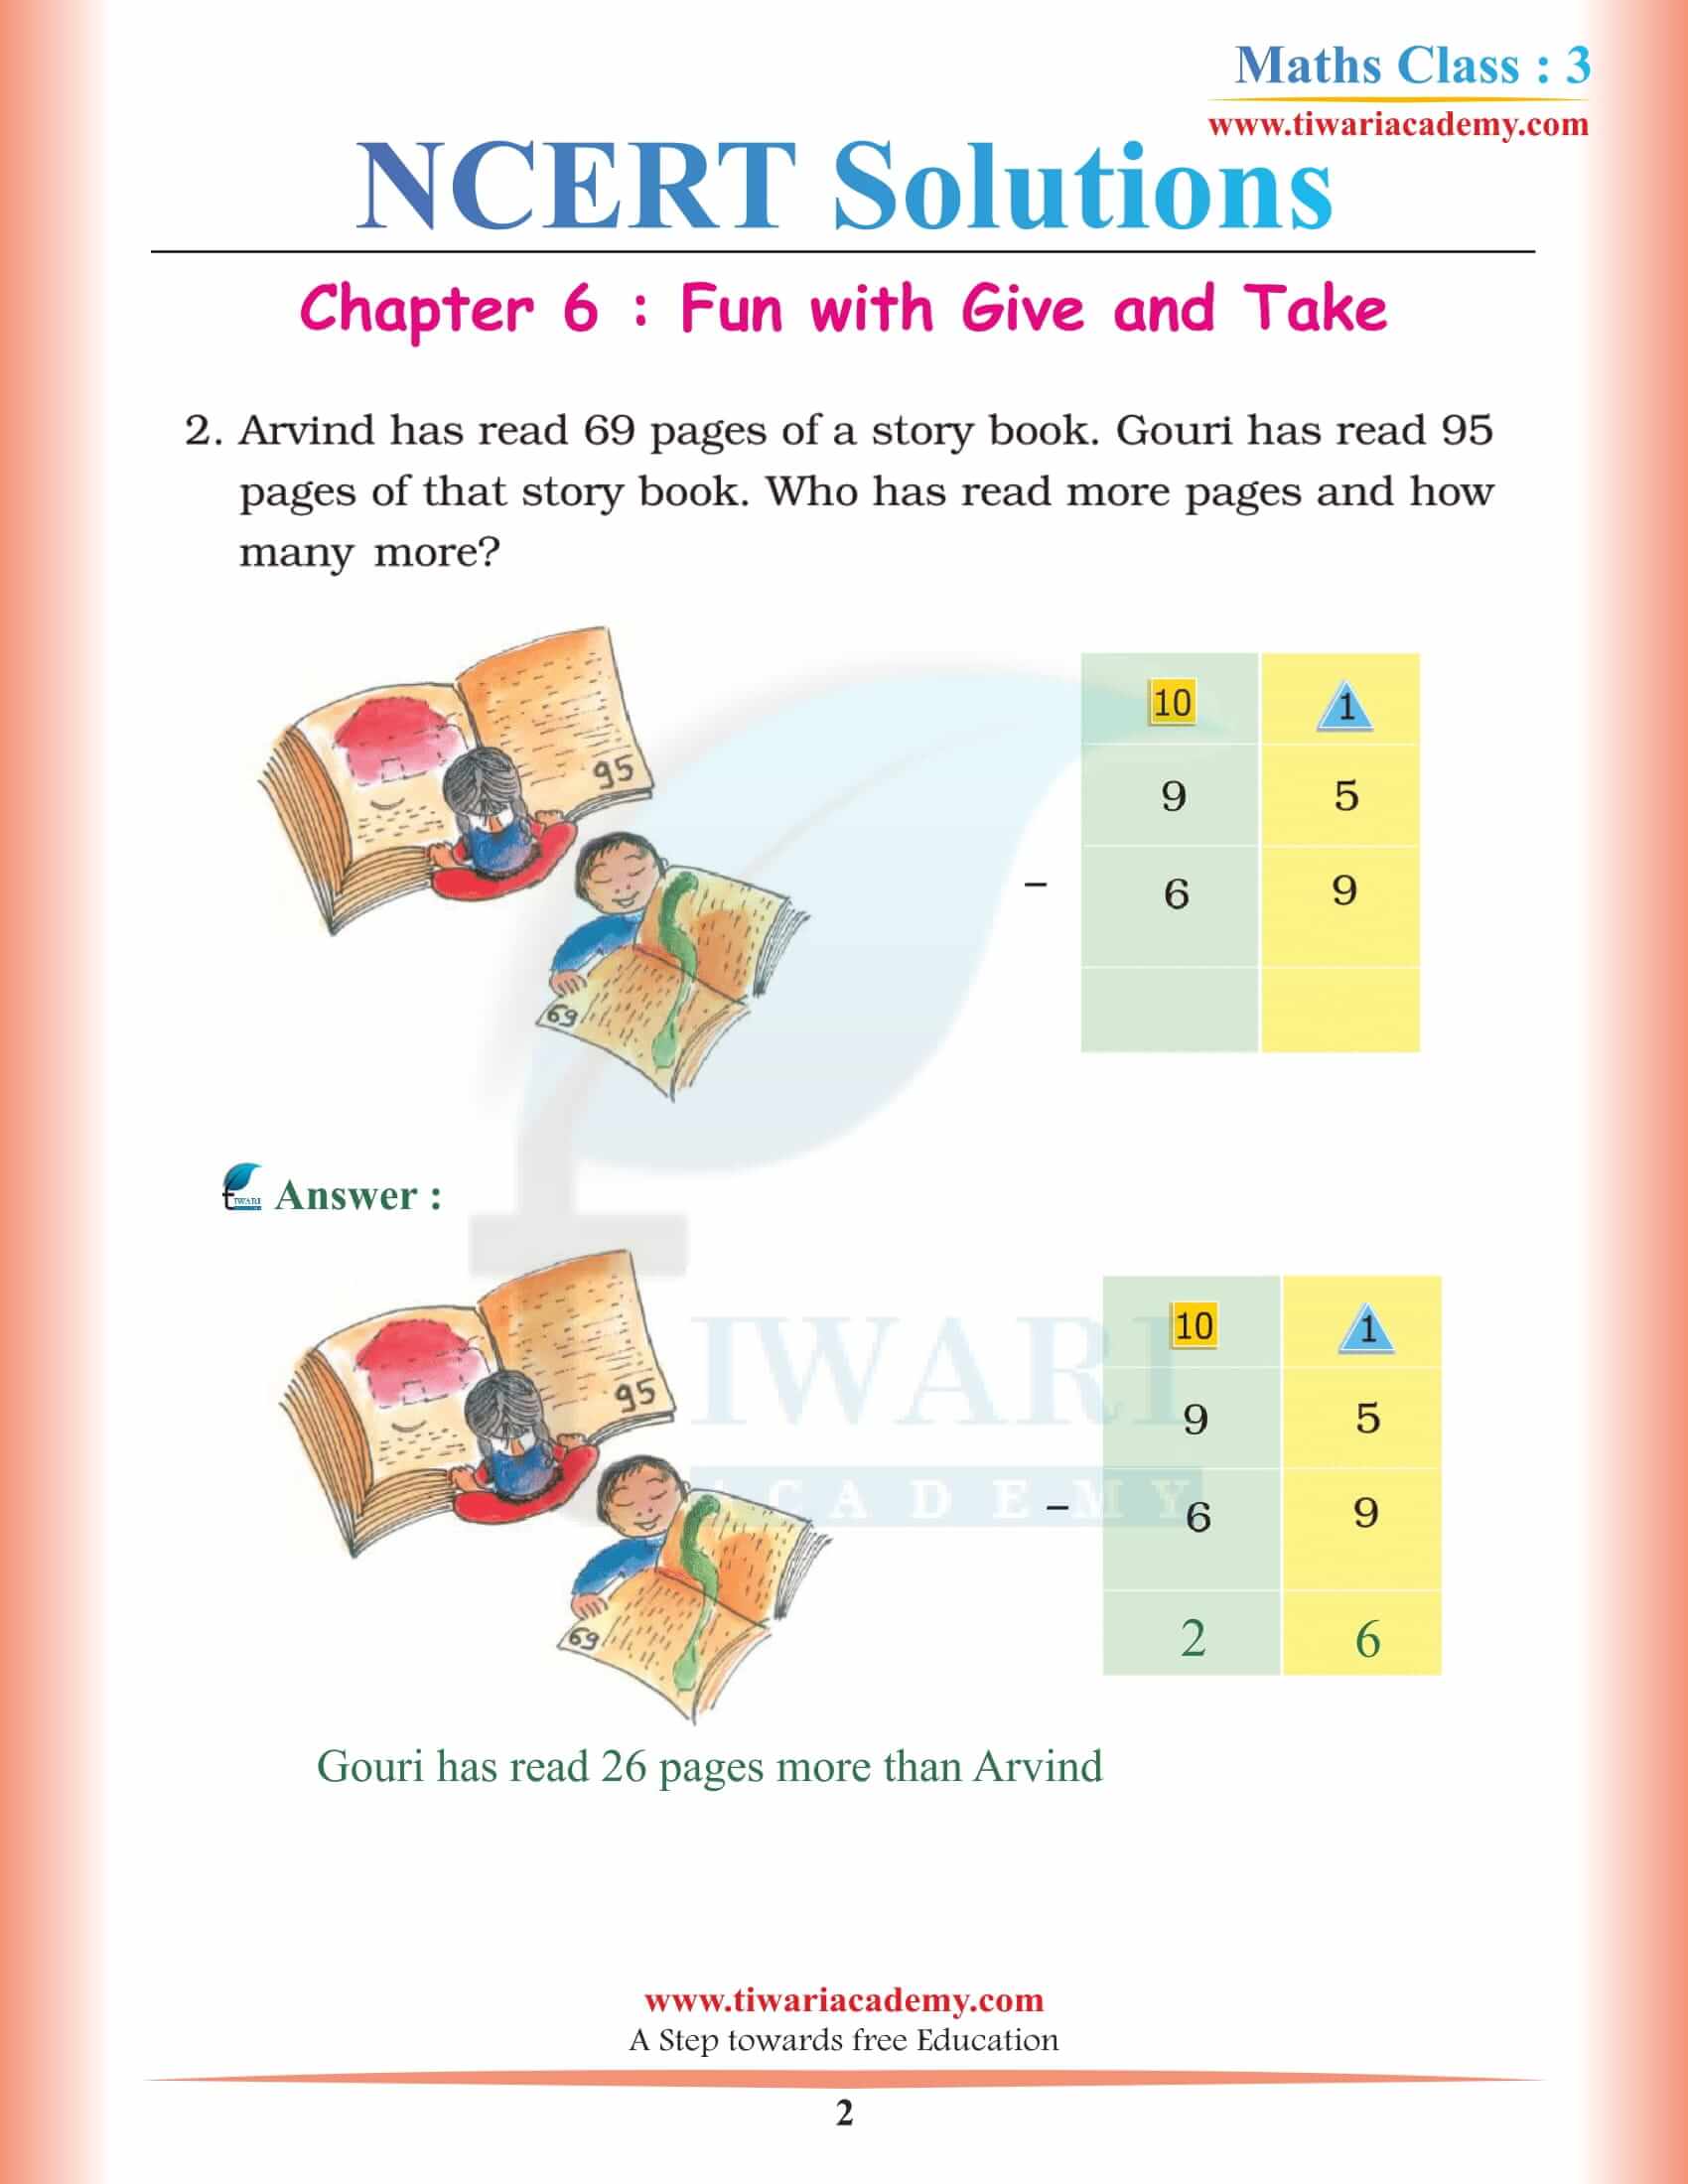 NCERT Solutions for Class 3 Maths Chapter 6 Fun with Give and Take in PDF file